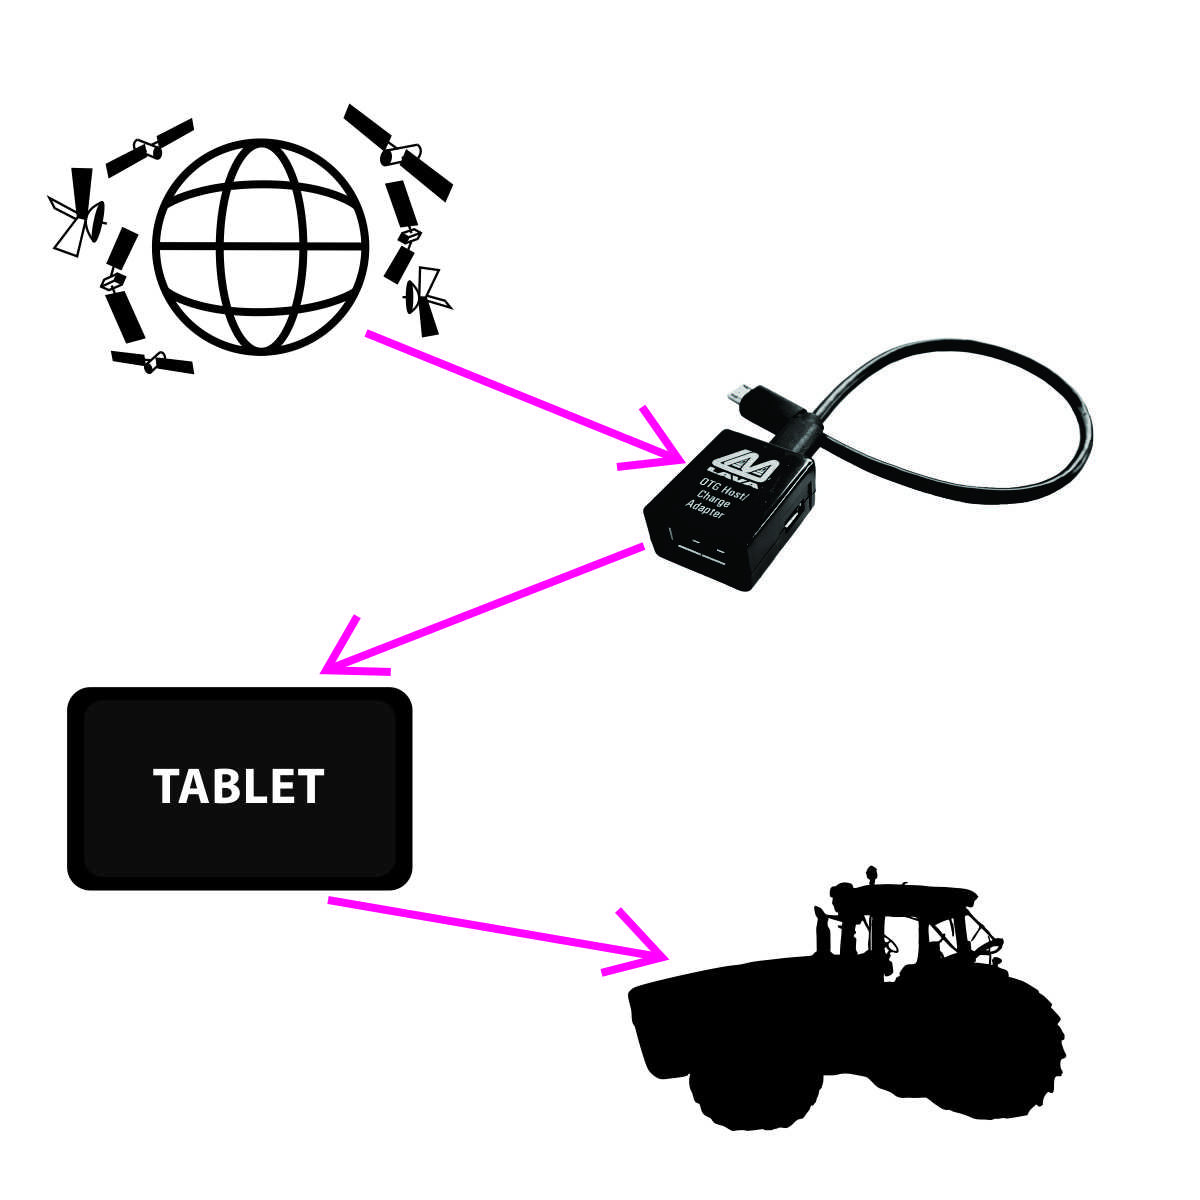 Diagram showing how TL-002R adapter charges tablet in tractor guidance system